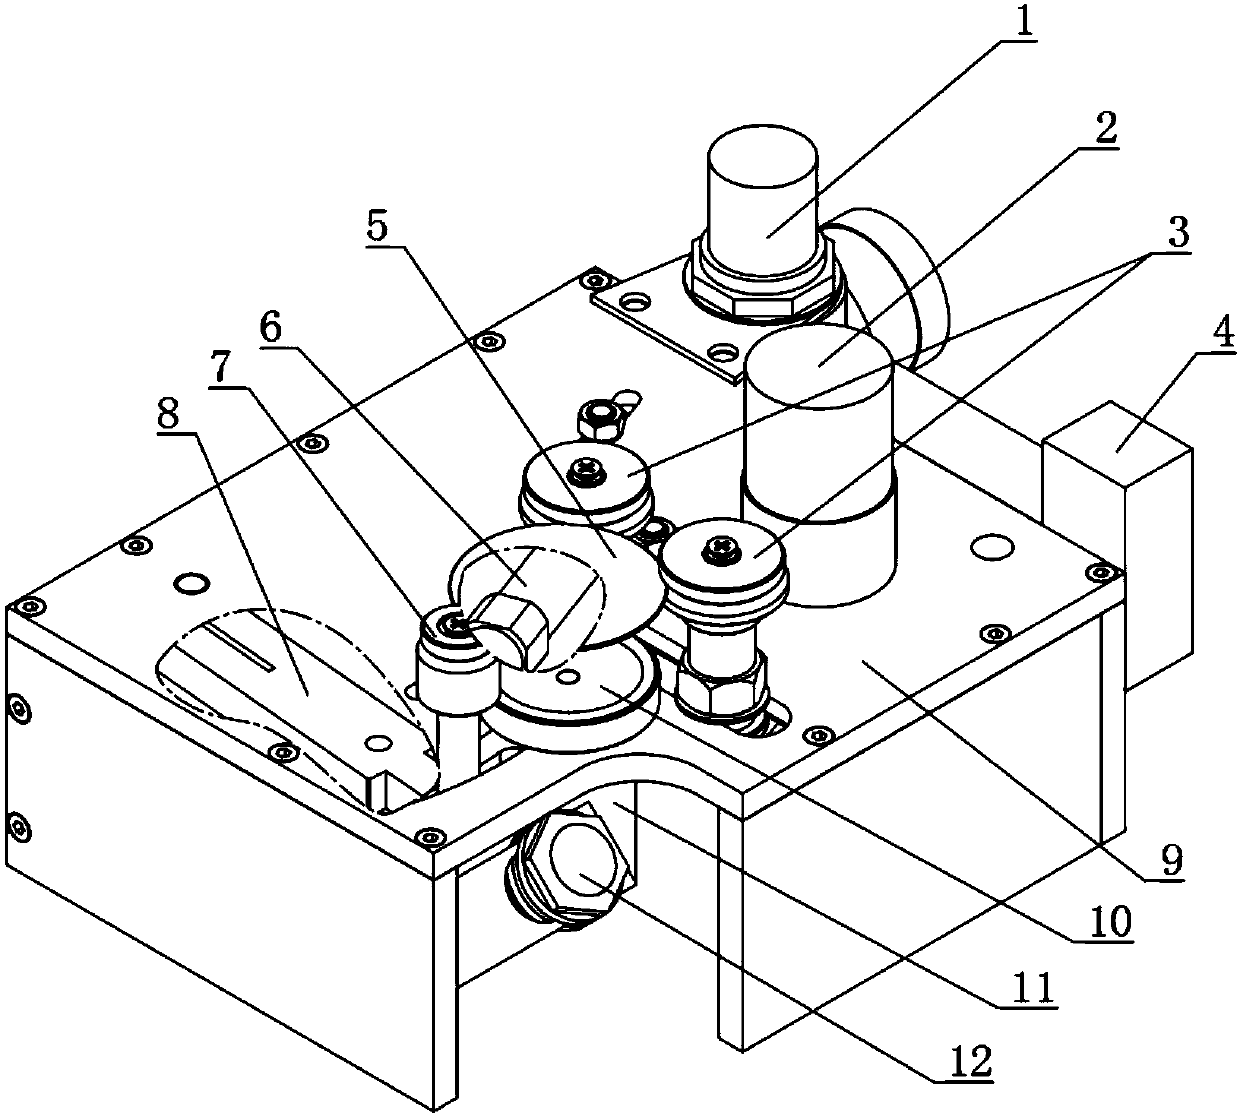 Machine for semi-automatically wiping oil on optical glass lens before washing of optical glass lens